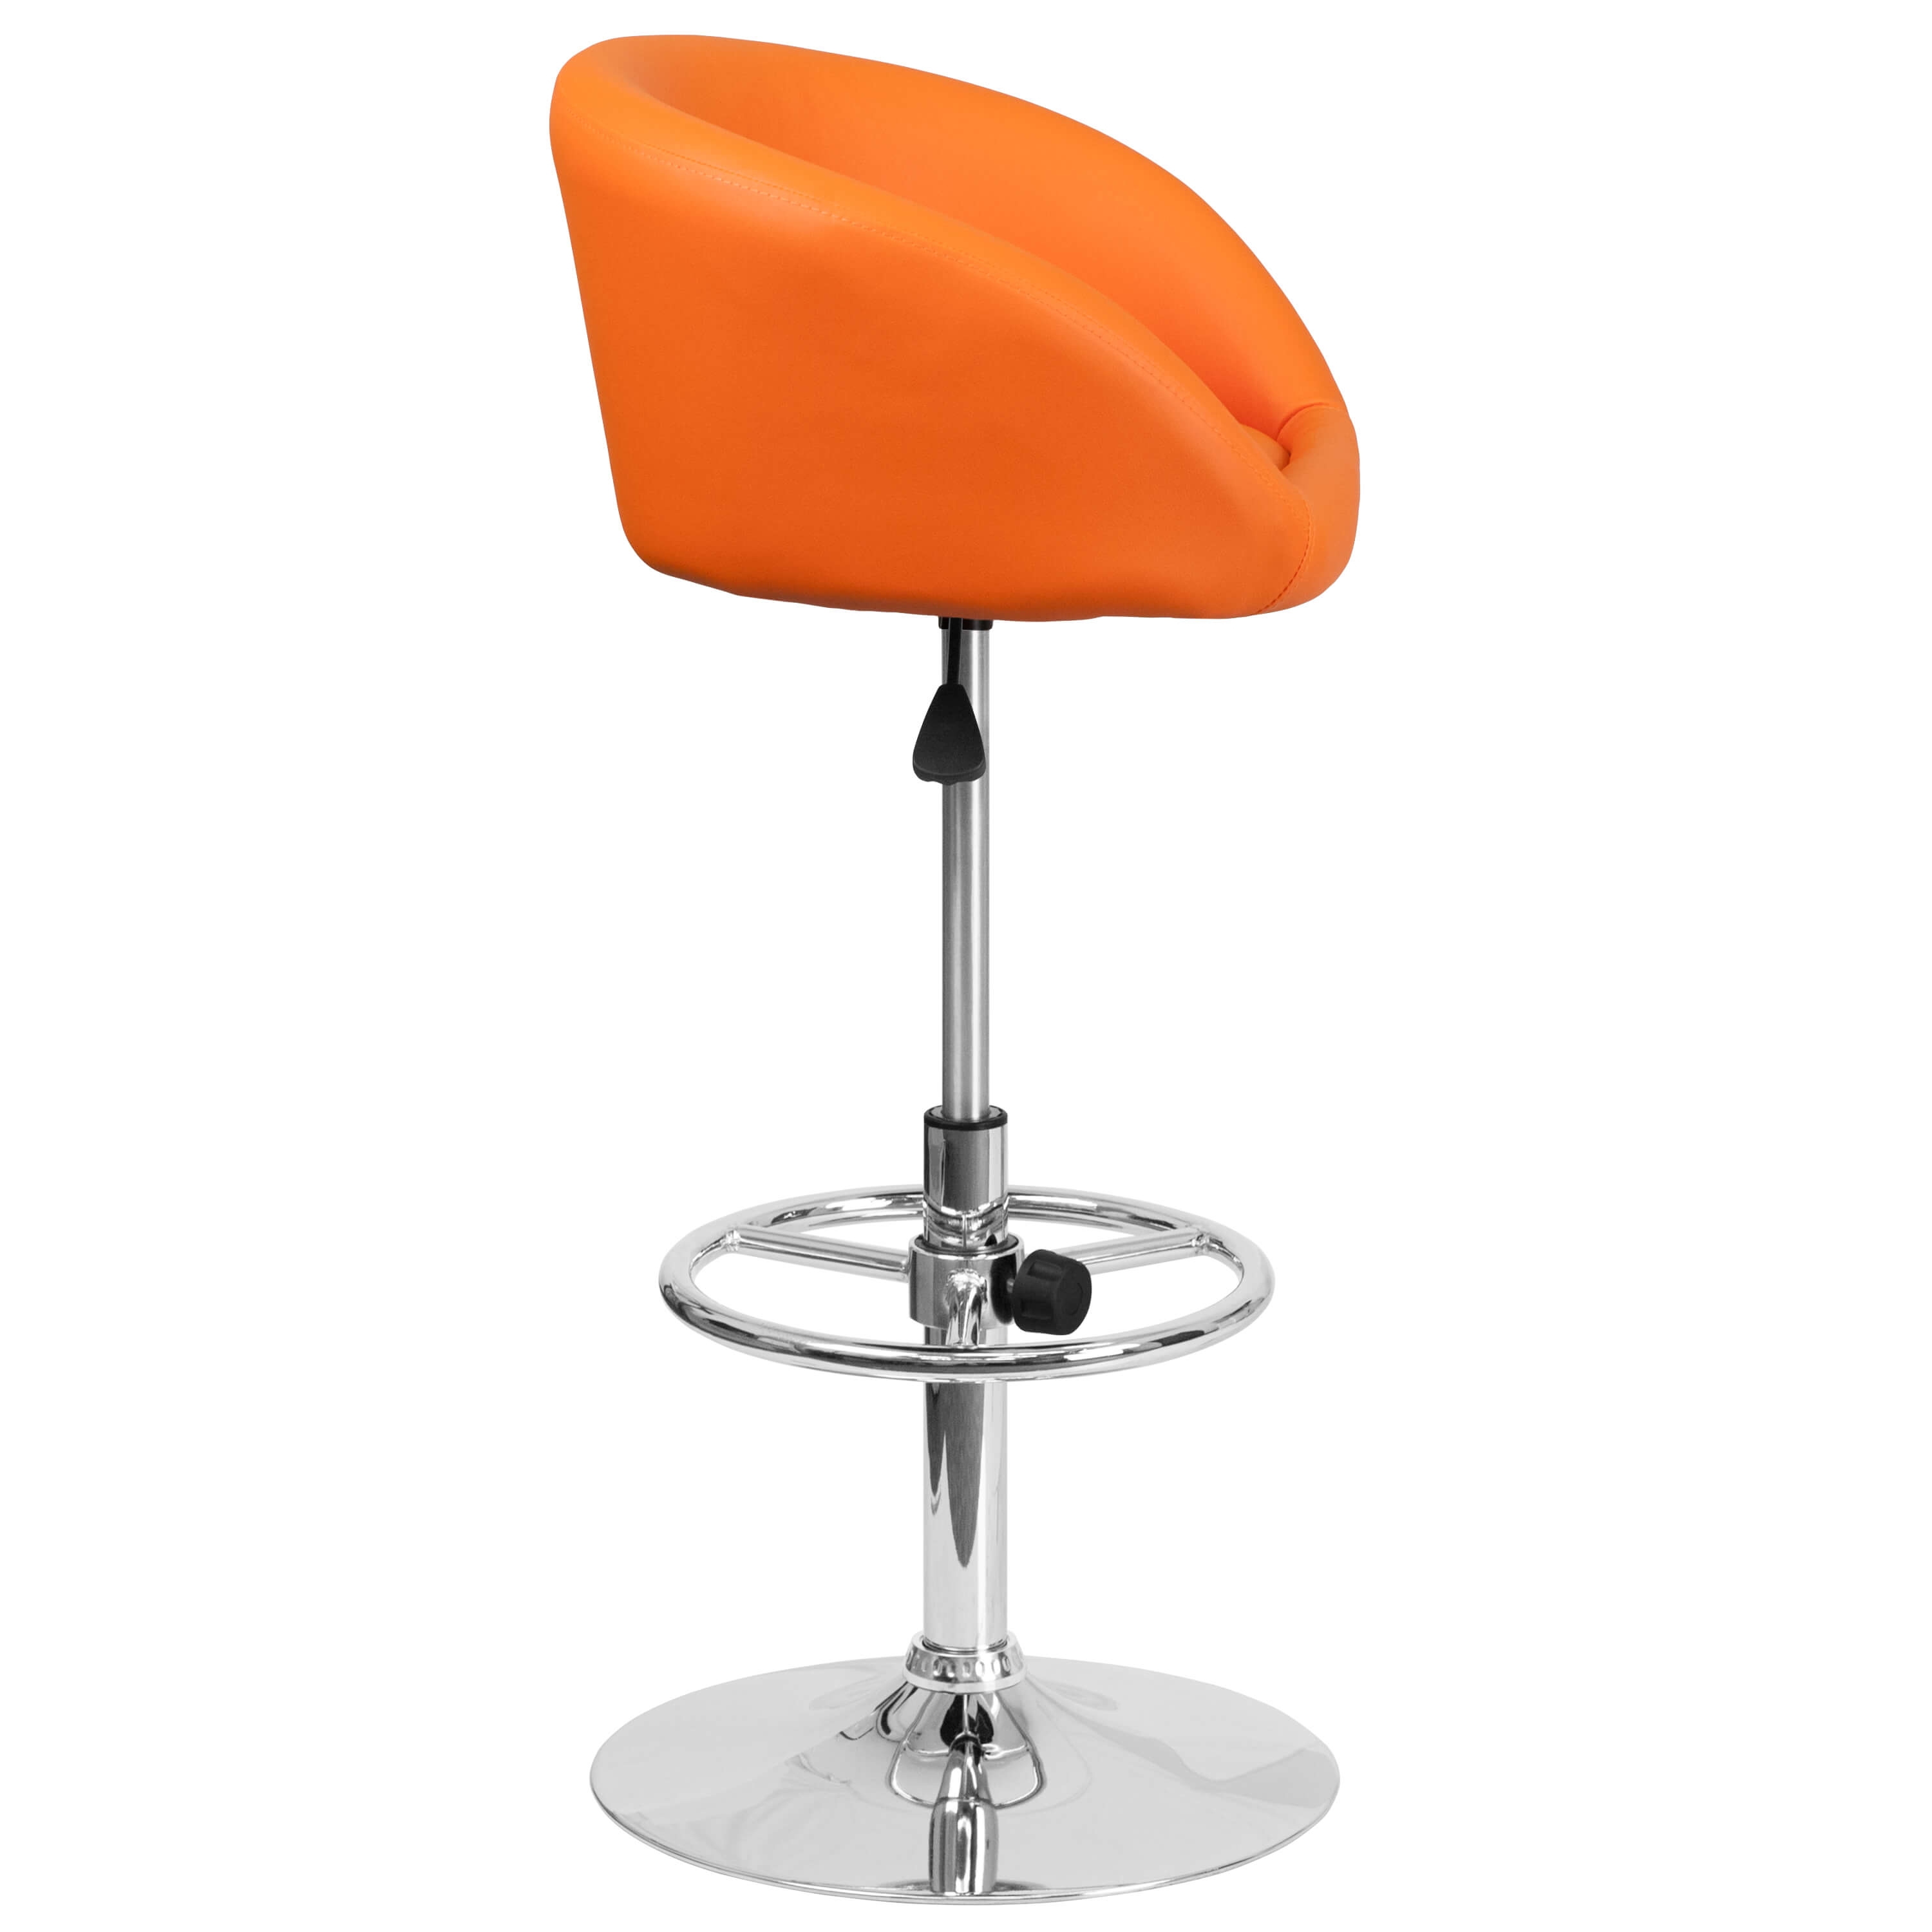 Adjustable colorful bar stools side view